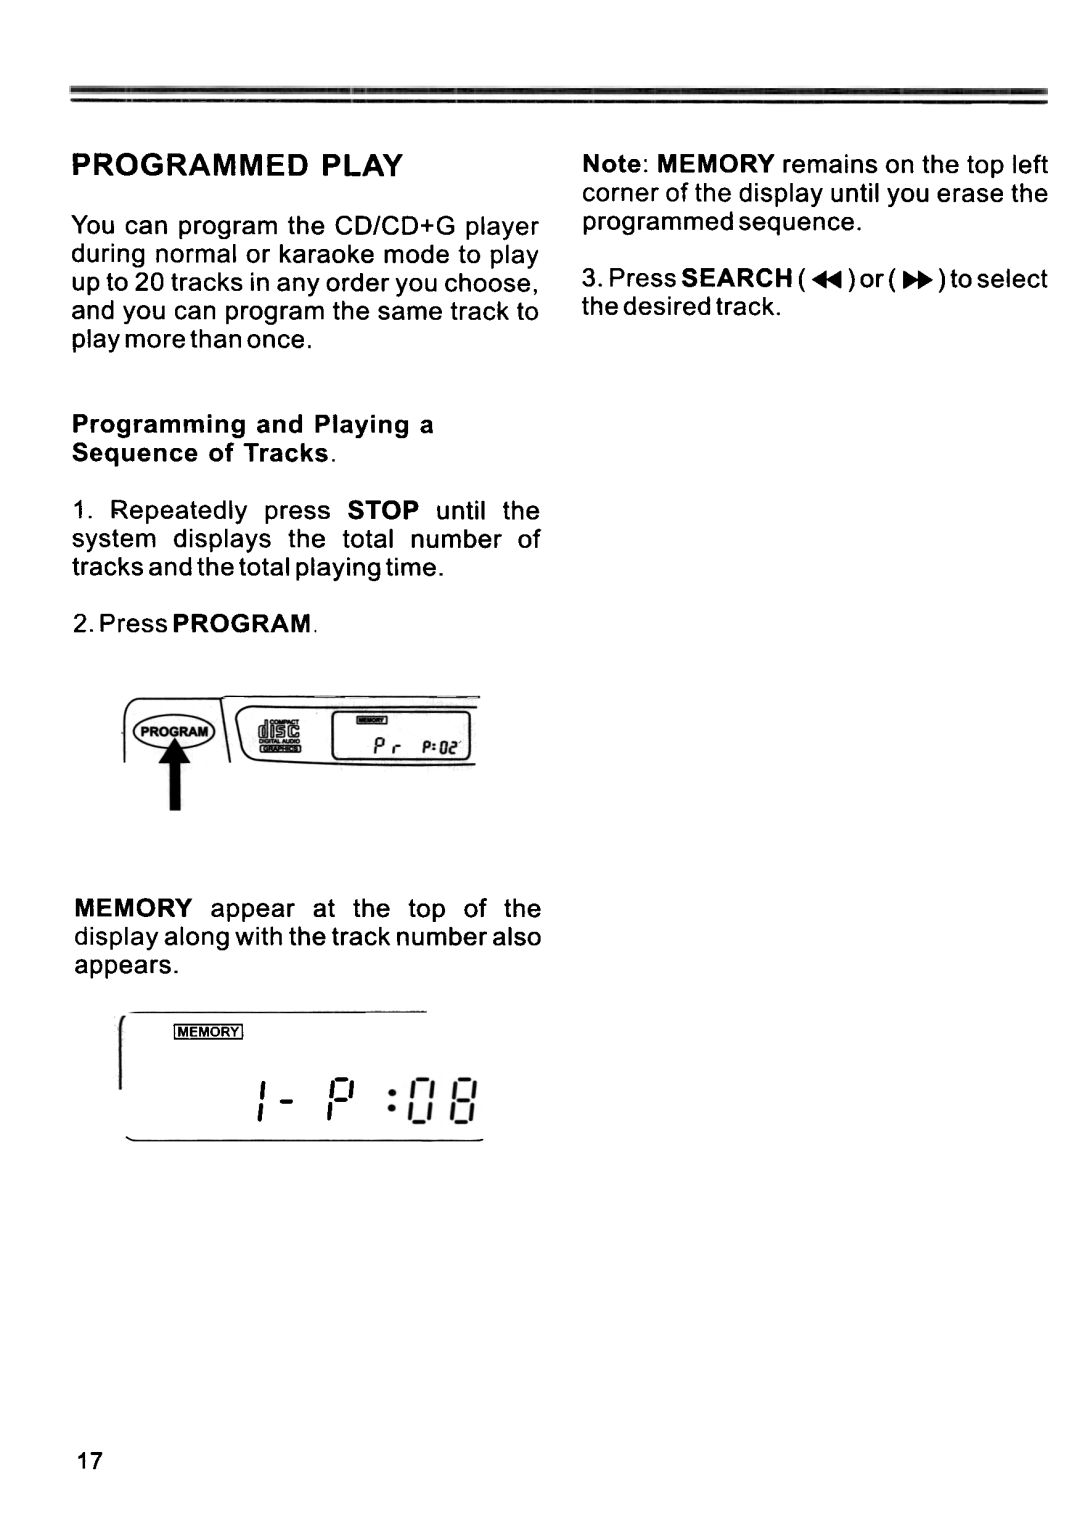 Memorex MKS 3001 manual Programmed Play, Programming and Playing a Sequence of Tracks 